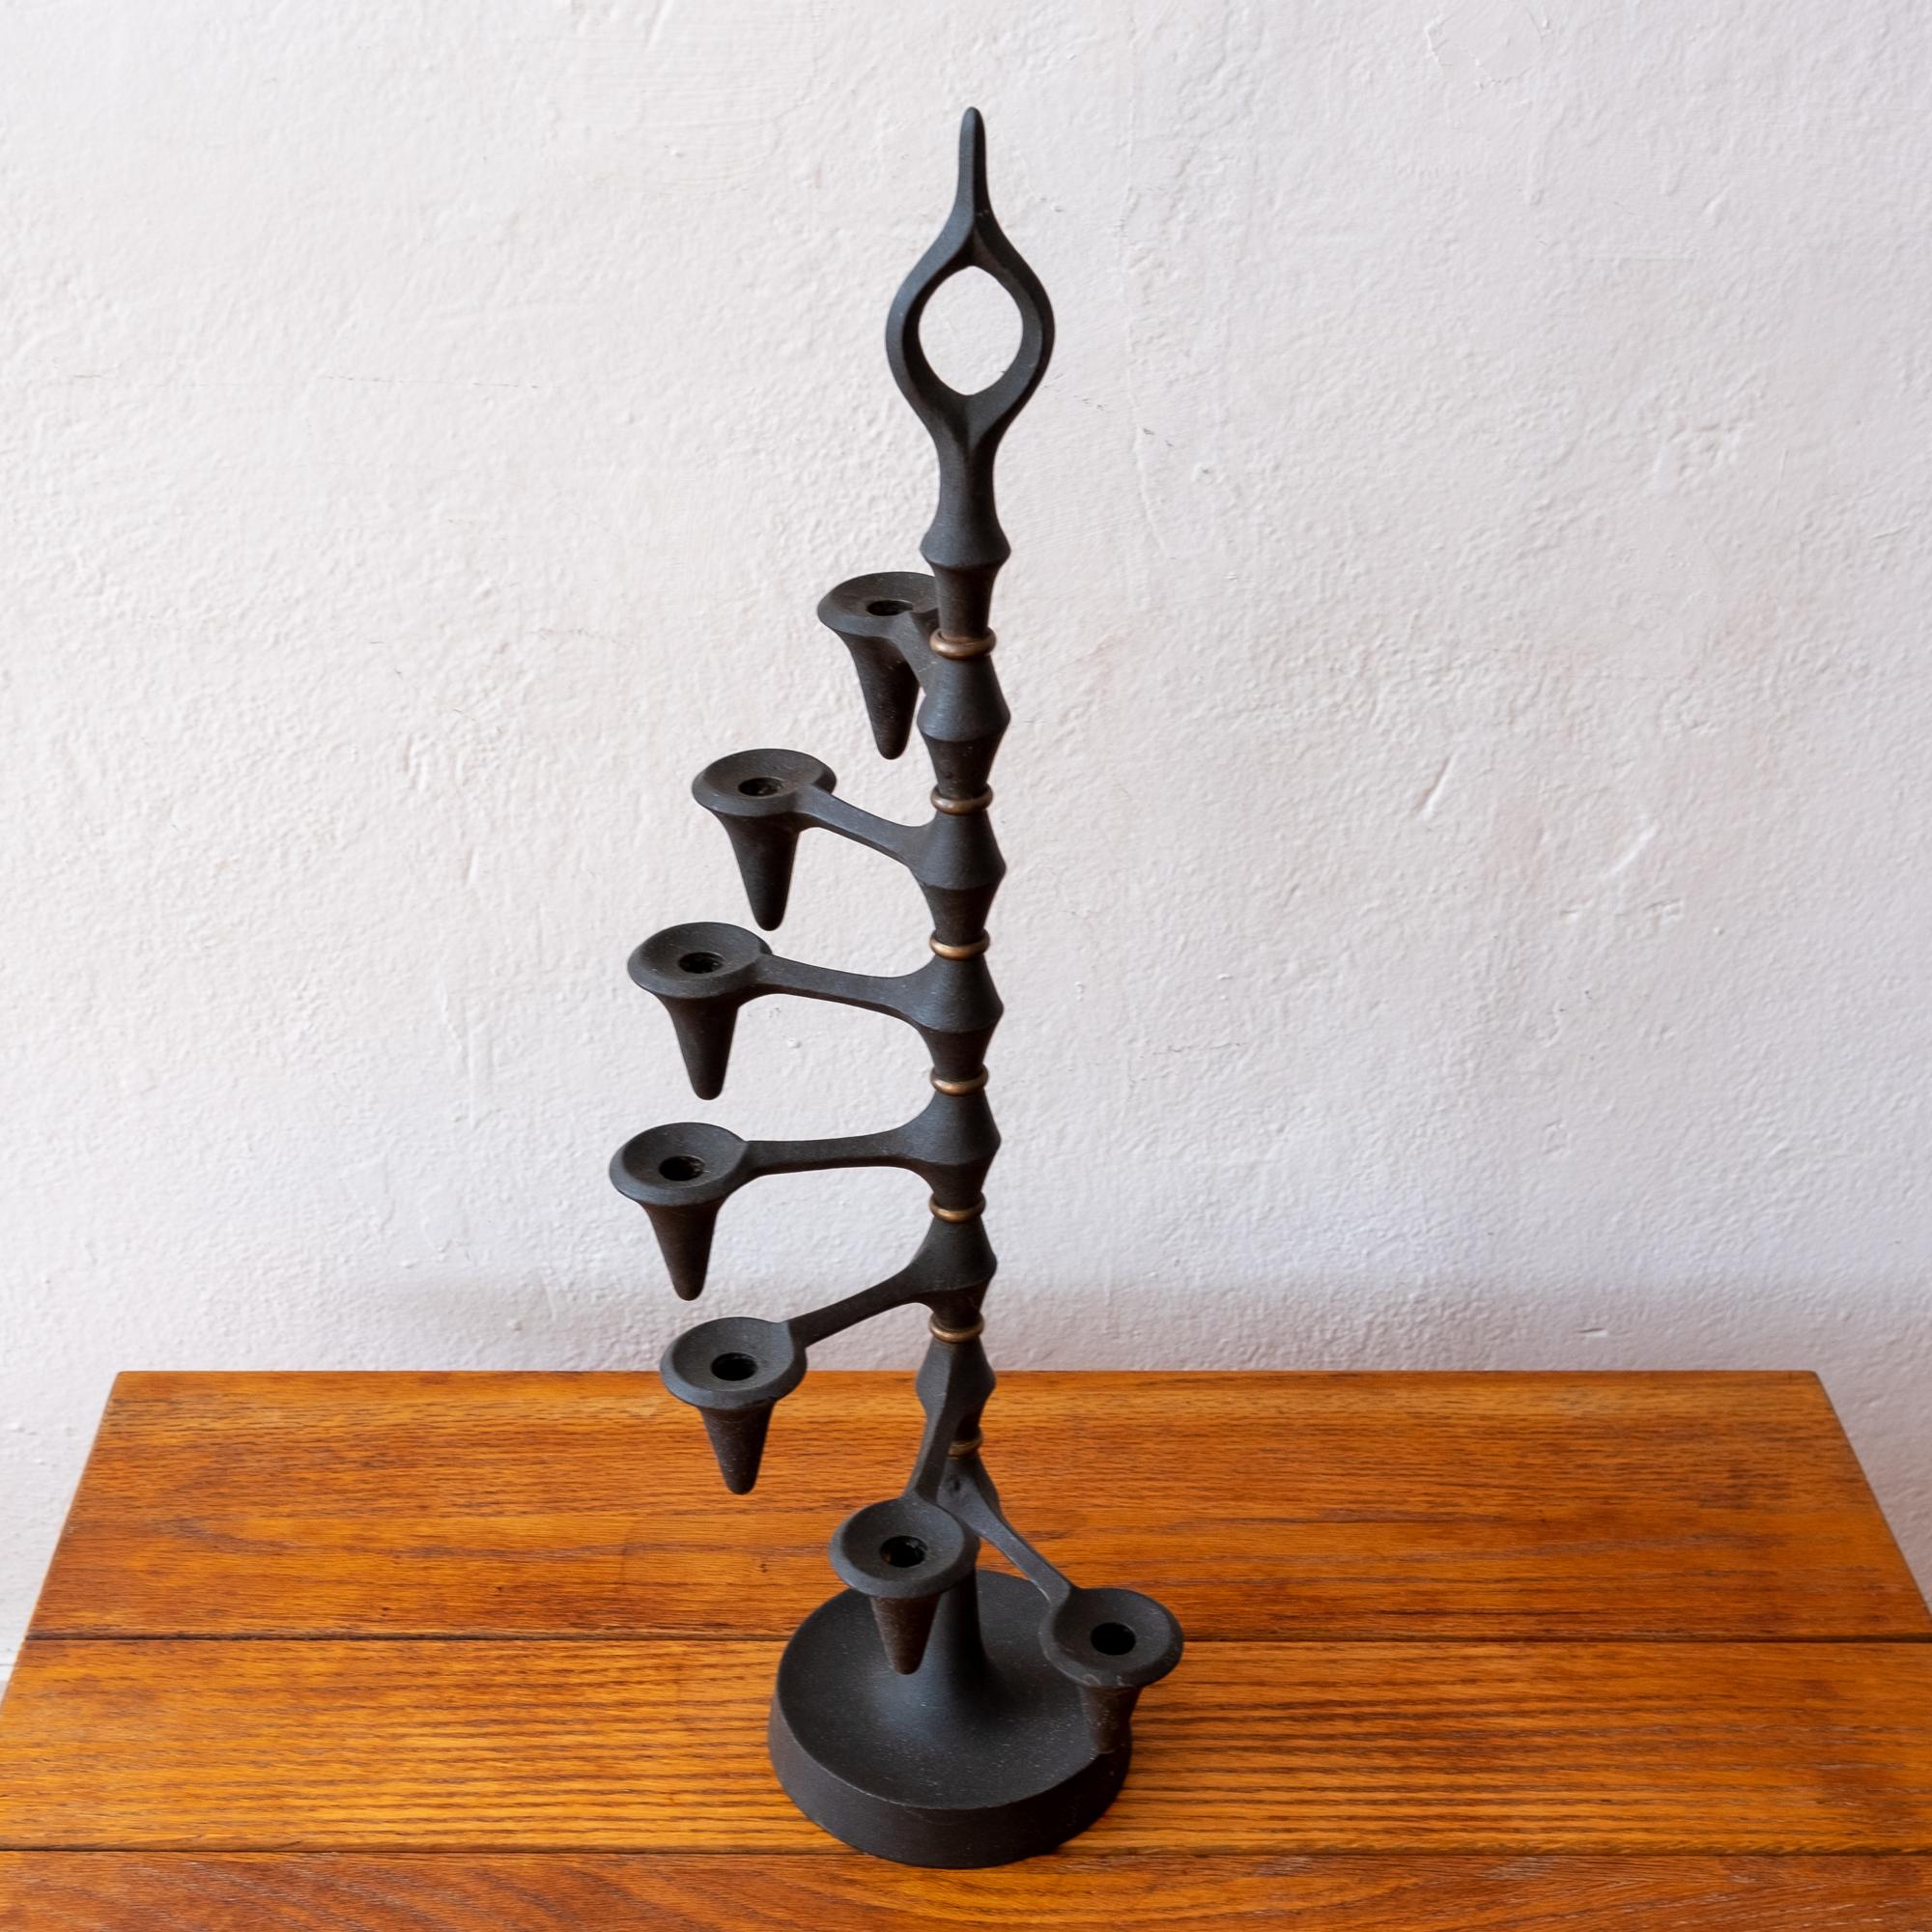 Seven arm articulated candleholder designed by Jens Quistgaard for Dansk. Solid iron with brass
fittings. Each candle arm can swivel and is adjustable. Marked on the bottom. Modernist sculptural design from the midcentury. Made in Denmark.